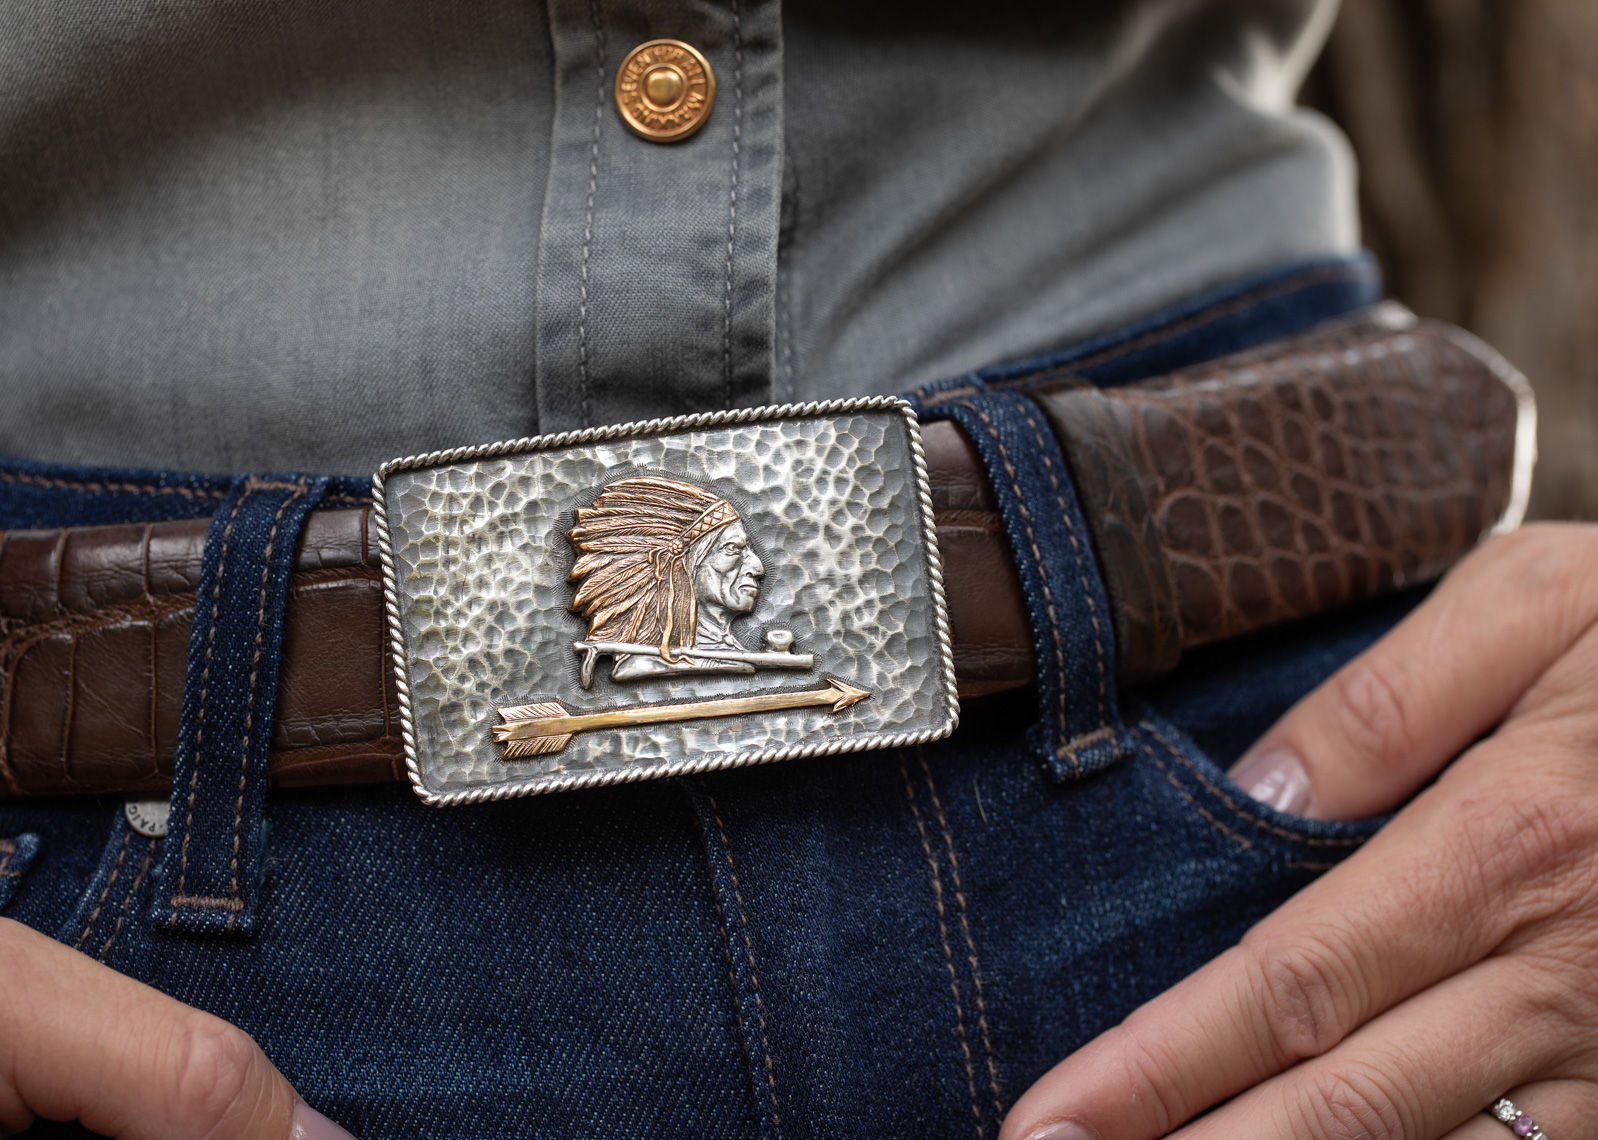 clint-orms-silver-belt-buckle-native-product-jason-risner-photography